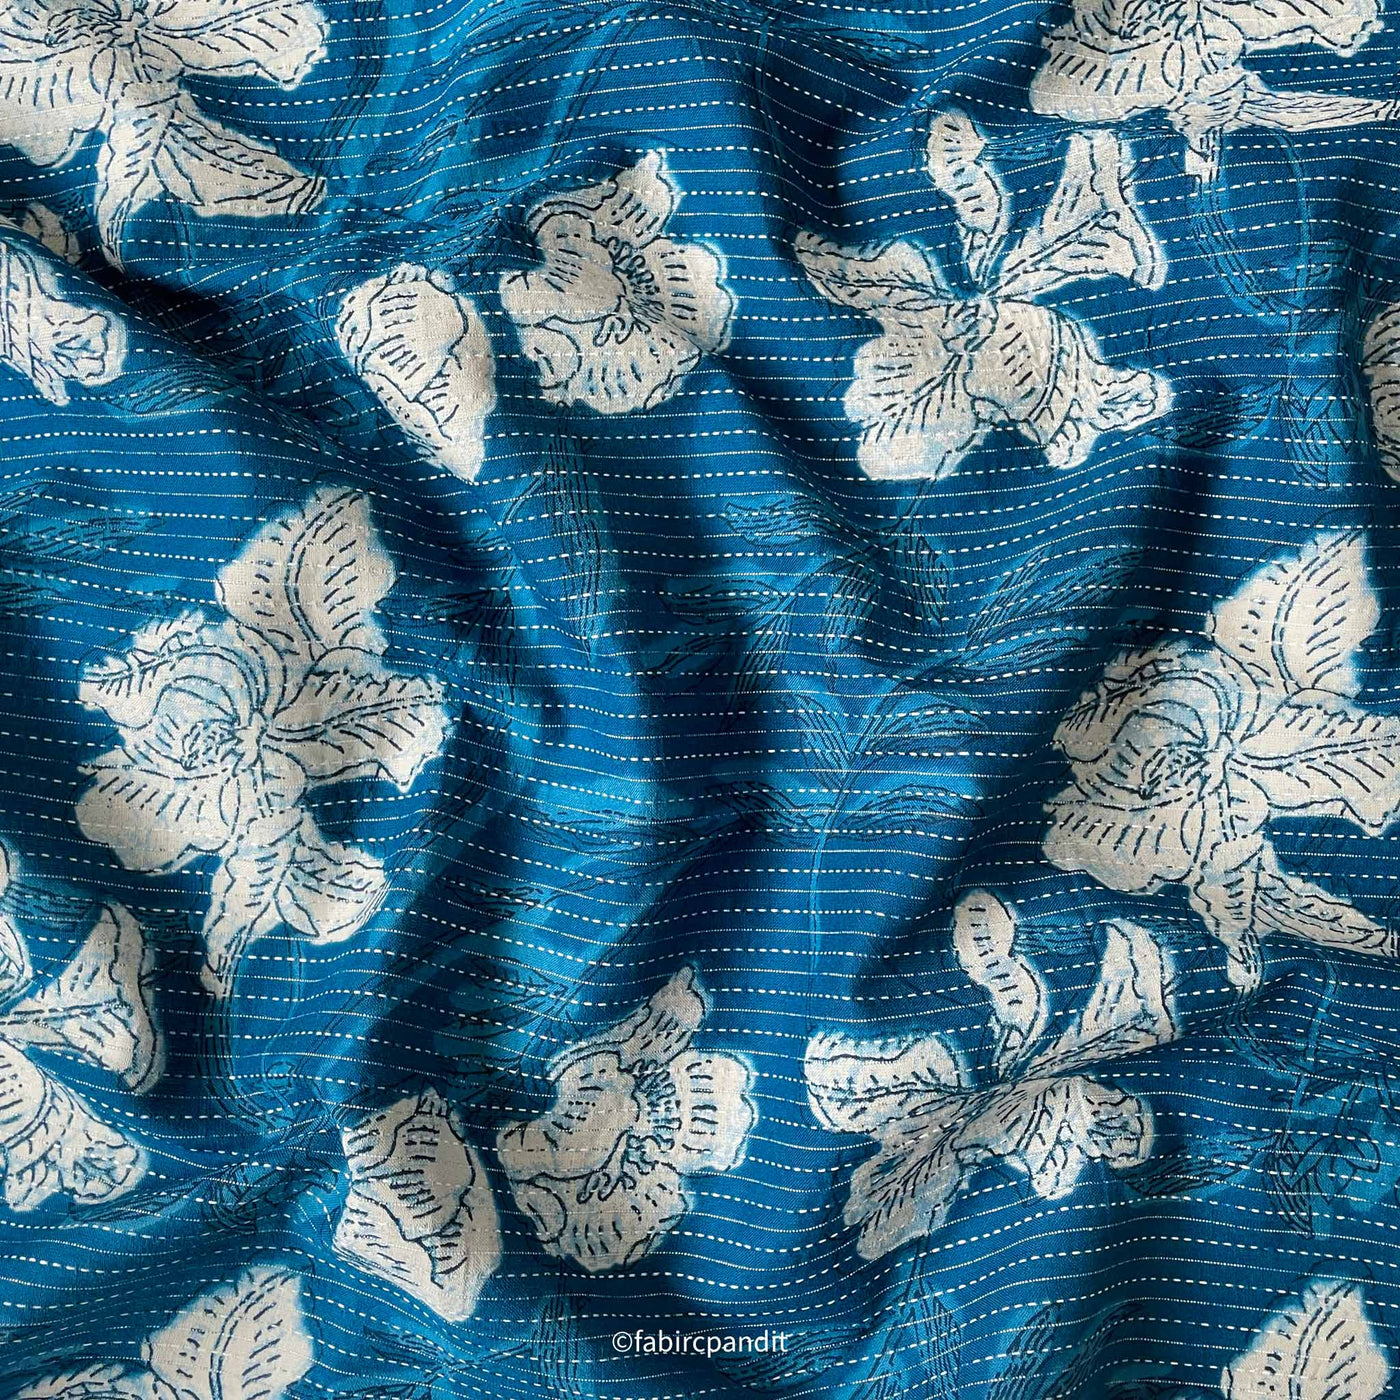 Fabric Pandit Cut Piece (Cut Piece) Indigo Blue and White Abstract Floral Hand Block Printed Kantha Pure Cotton Fabric (Width 43 inches)